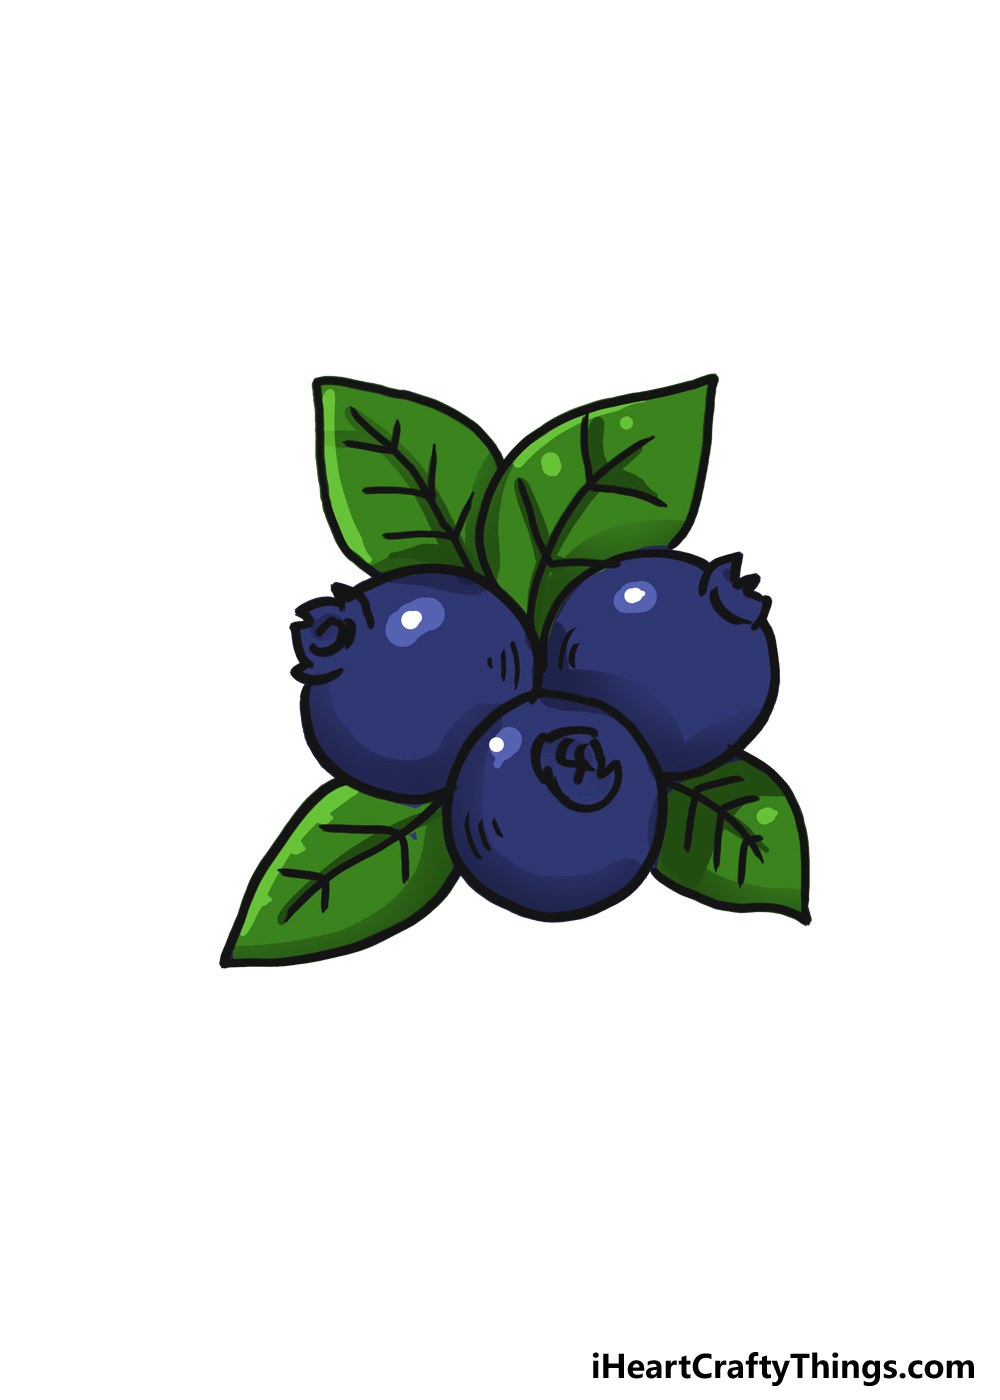 How to Draw A Blueberry step 6